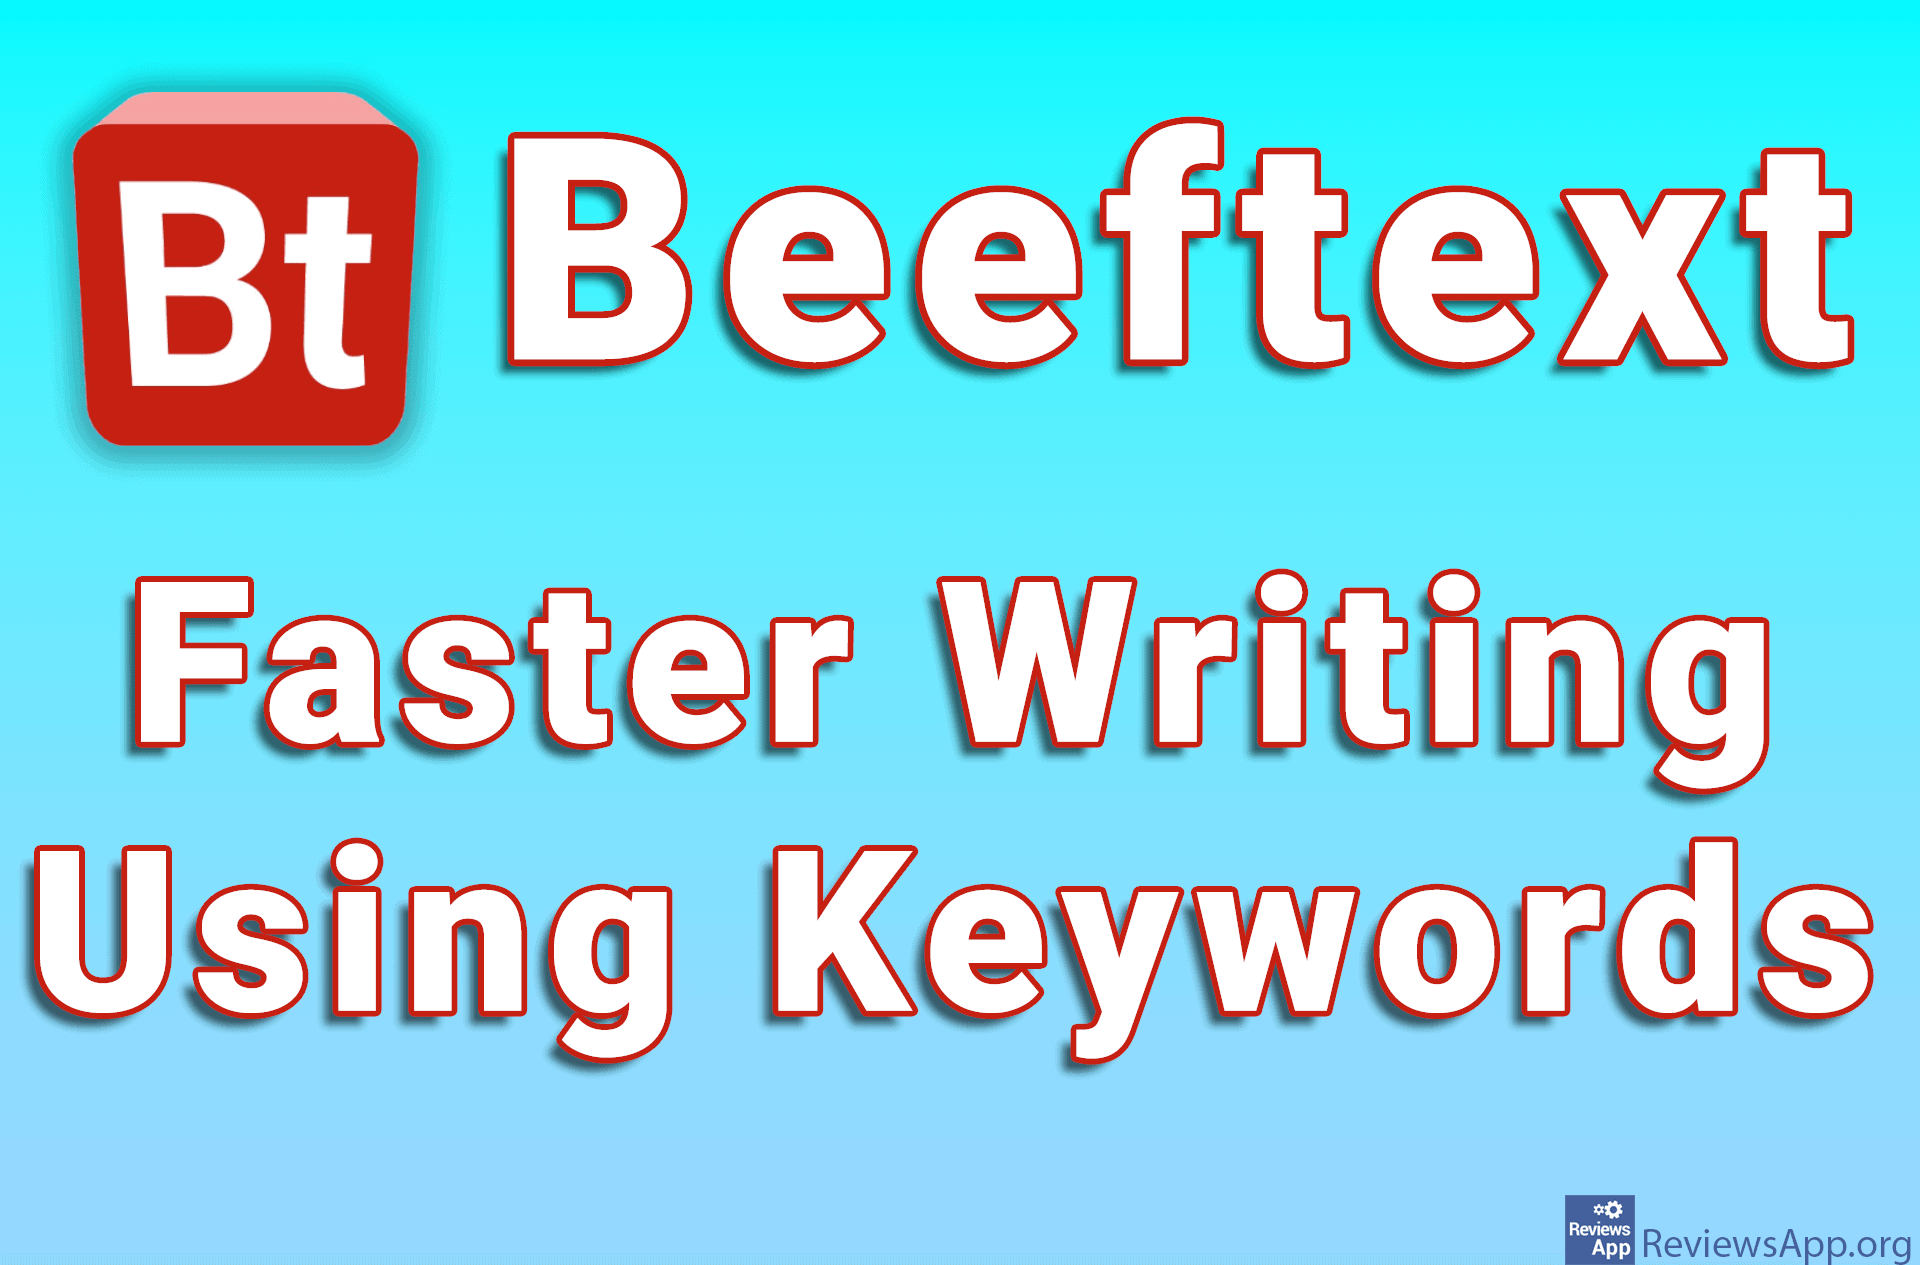 Beeftext – Faster Writing Using Keywords